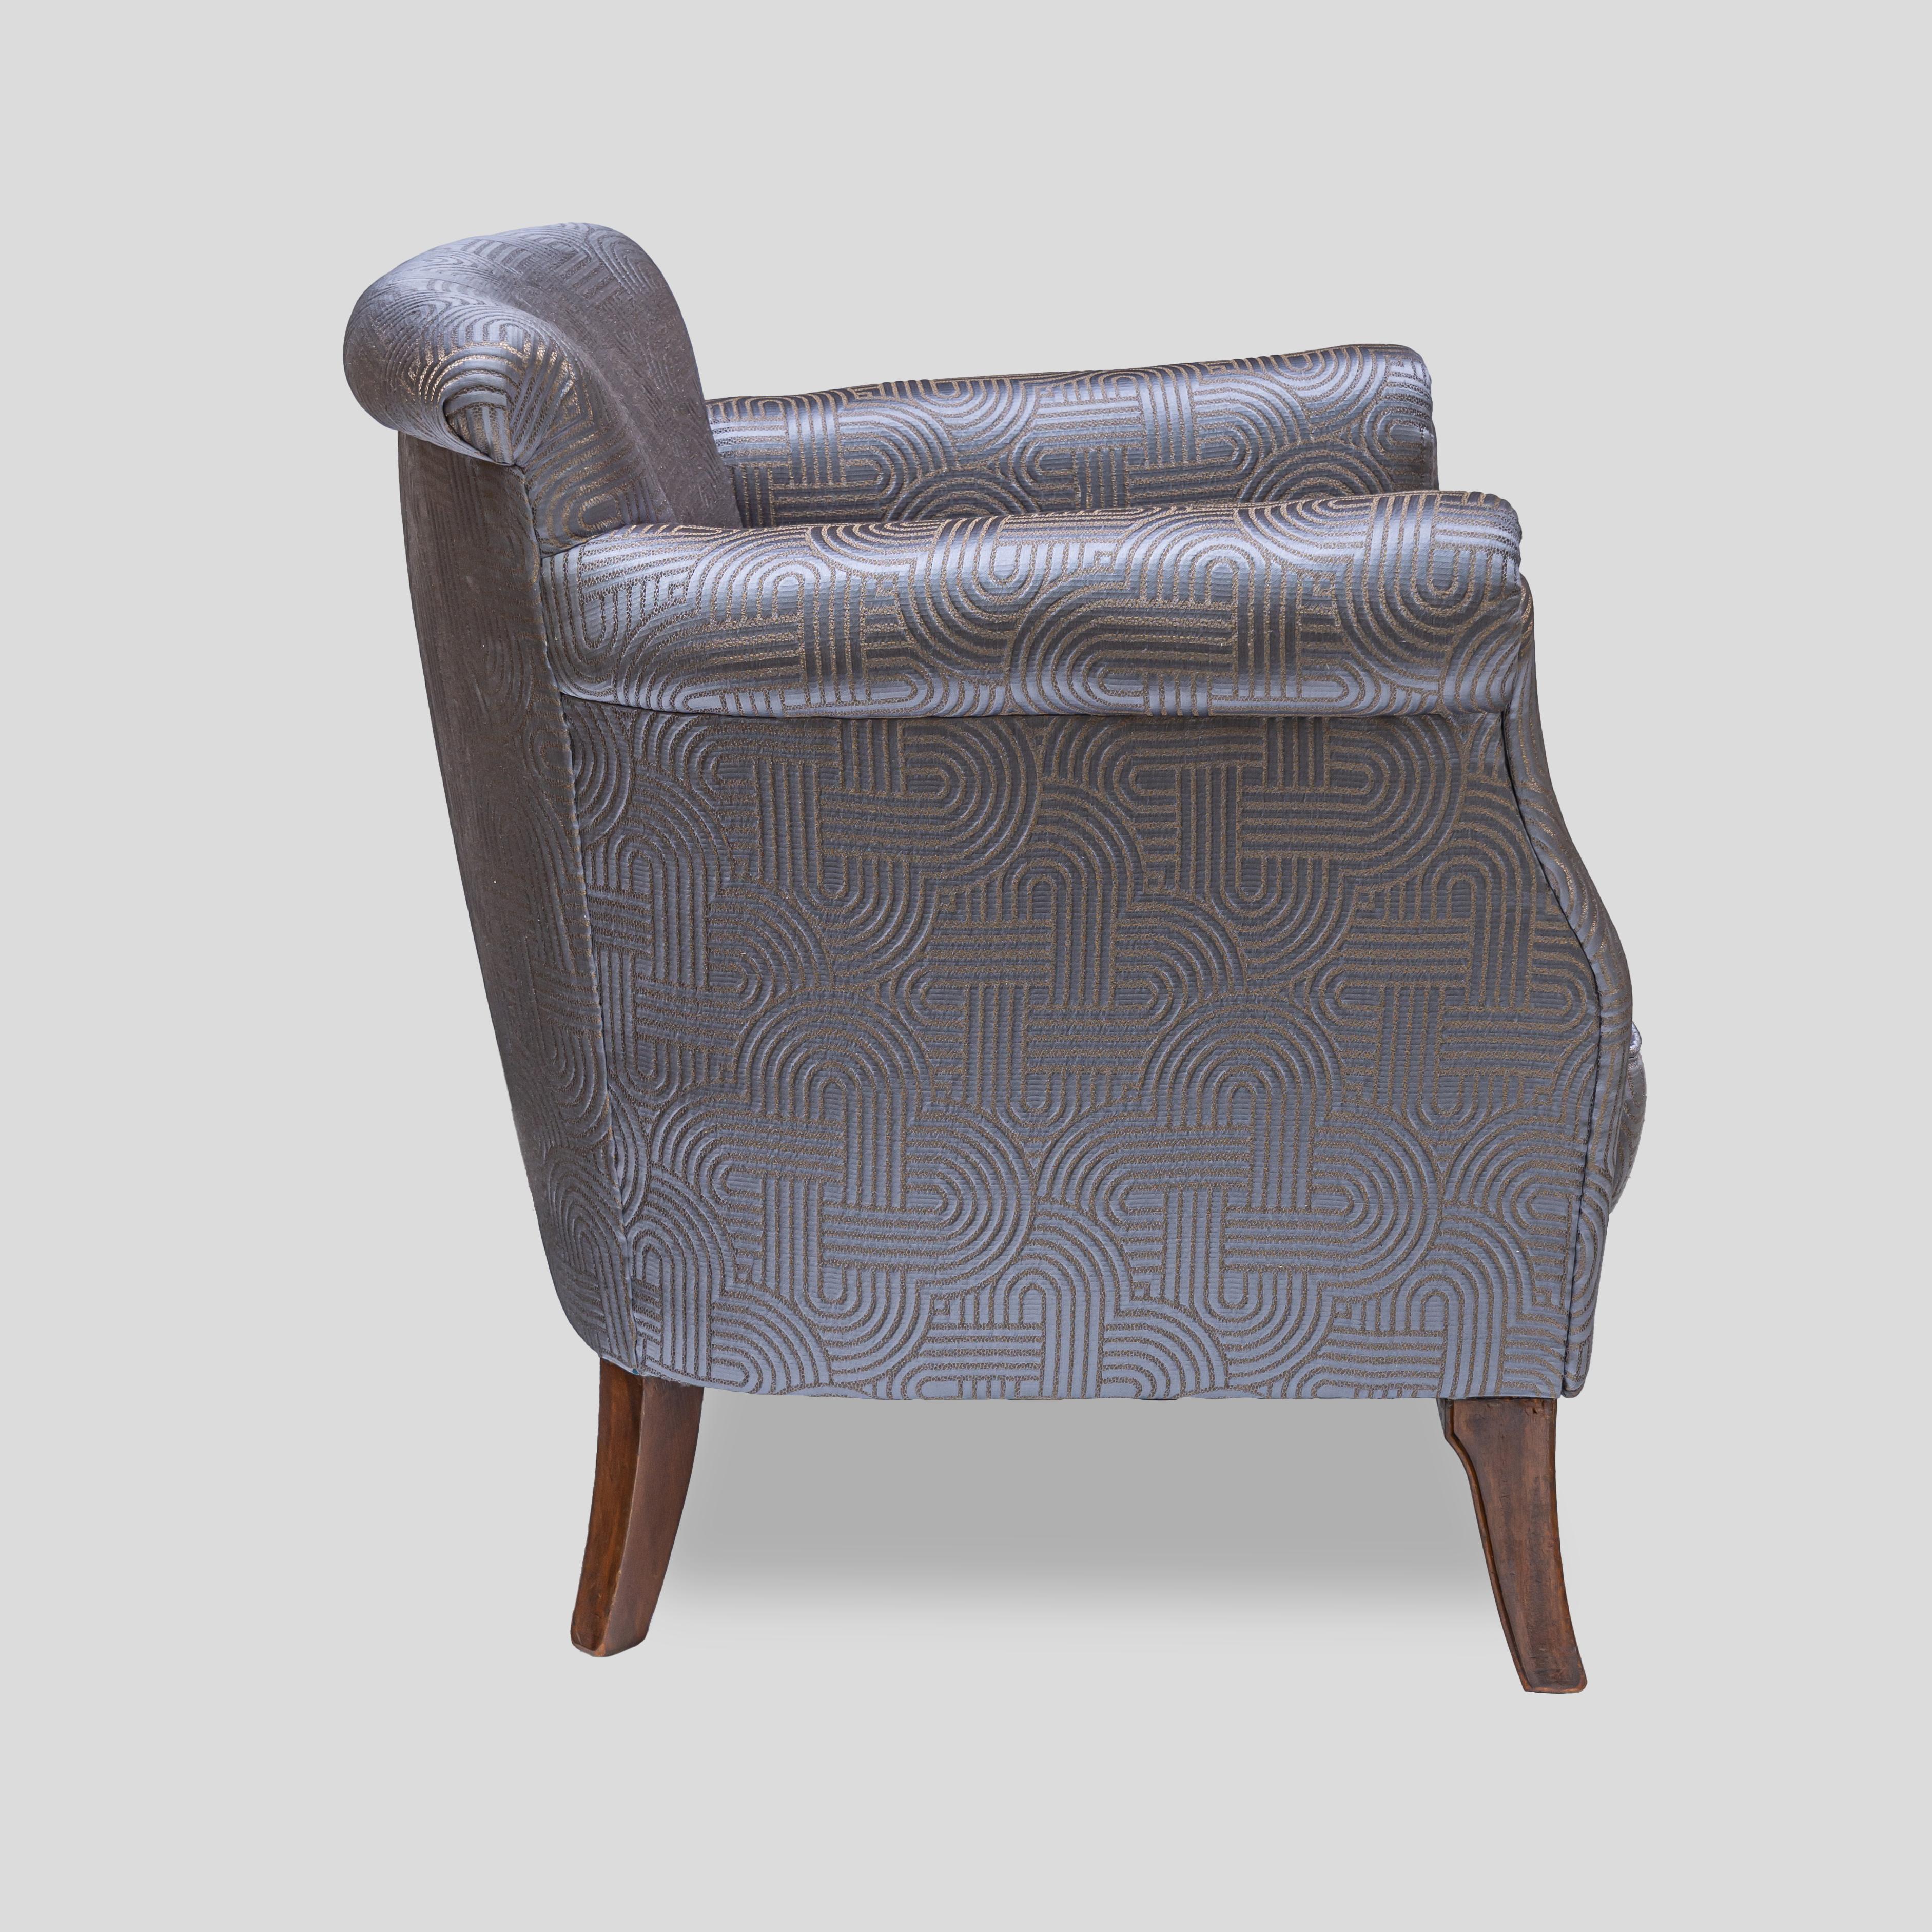 1930s Art Deco French Design Armchair in Satin Grey Upholstery Wall Nut Wood In Good Condition For Sale In London, GB